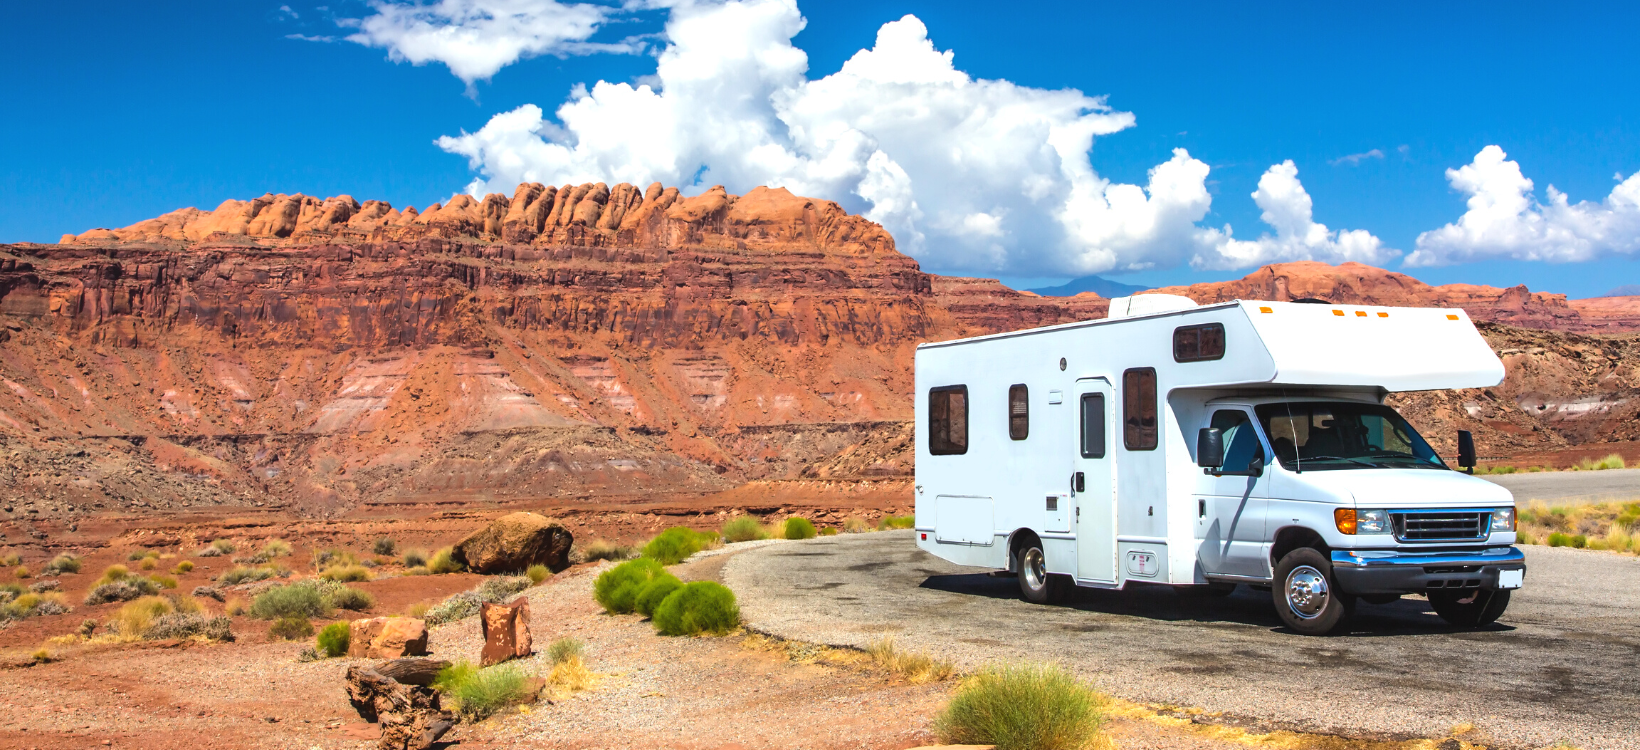 RV Office Space Things To Consider: Taxes, Legal, & More 1